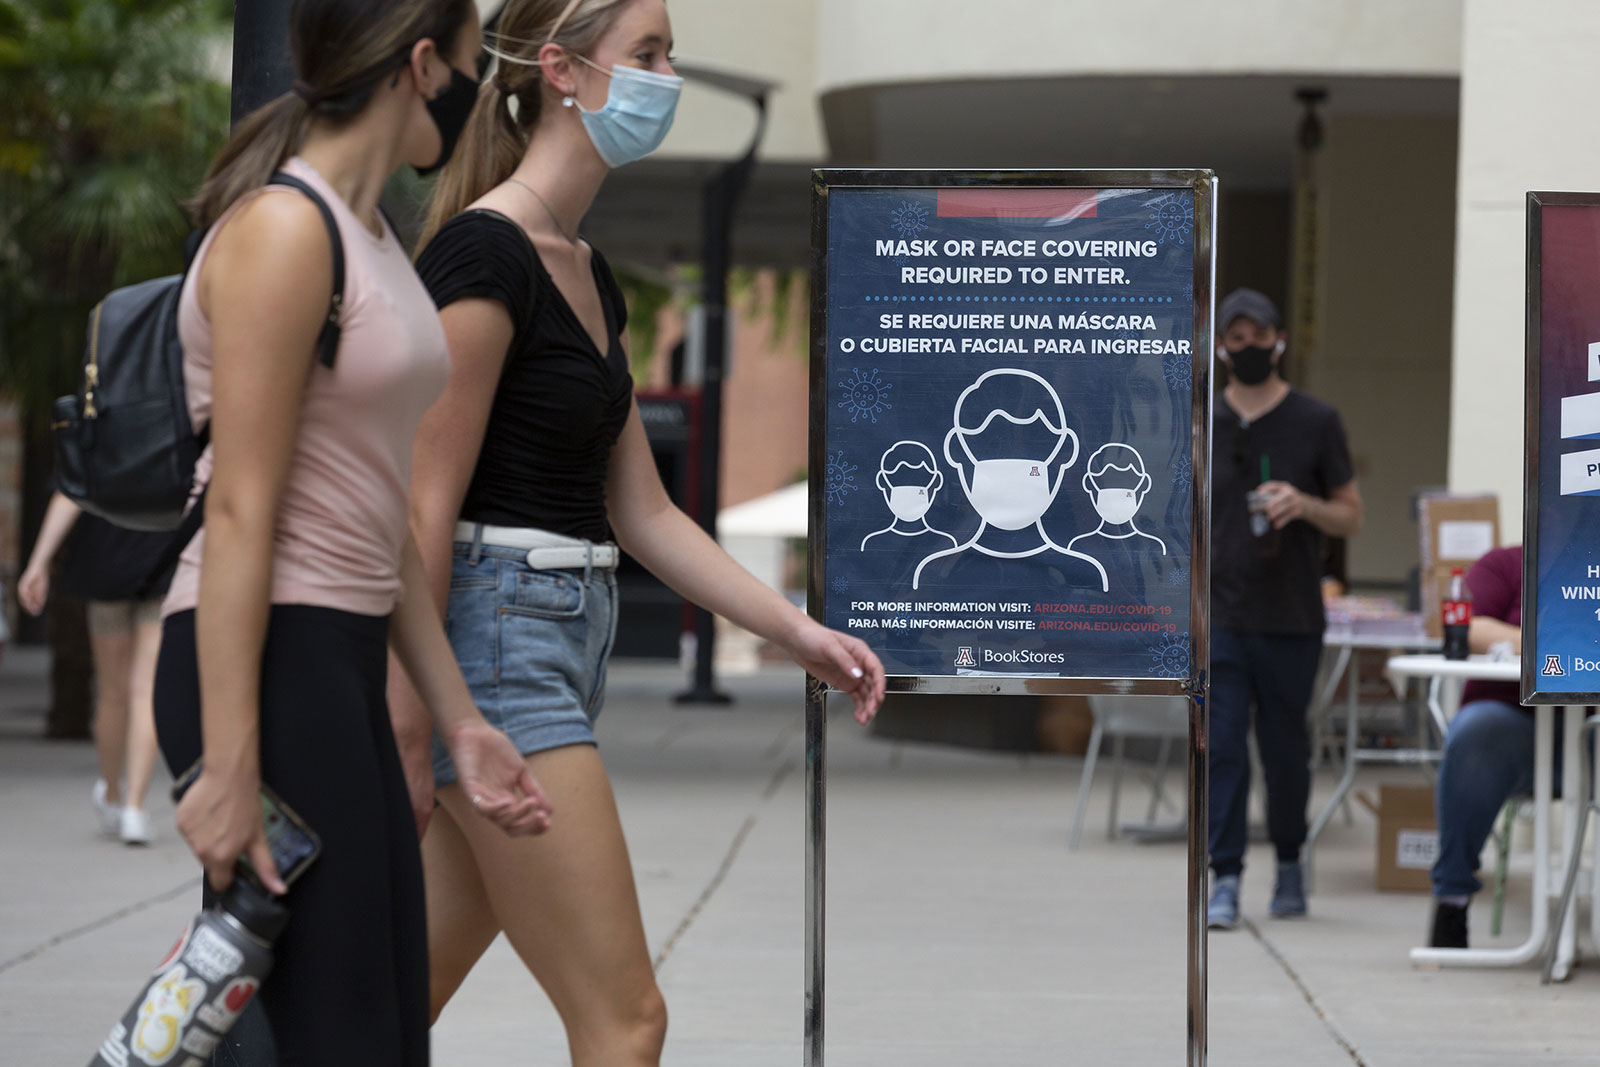 Students pass in front of a sign that reads "Mask Or Face Covering Required To Enter" at the University of Arizona in Tucson on August 24.